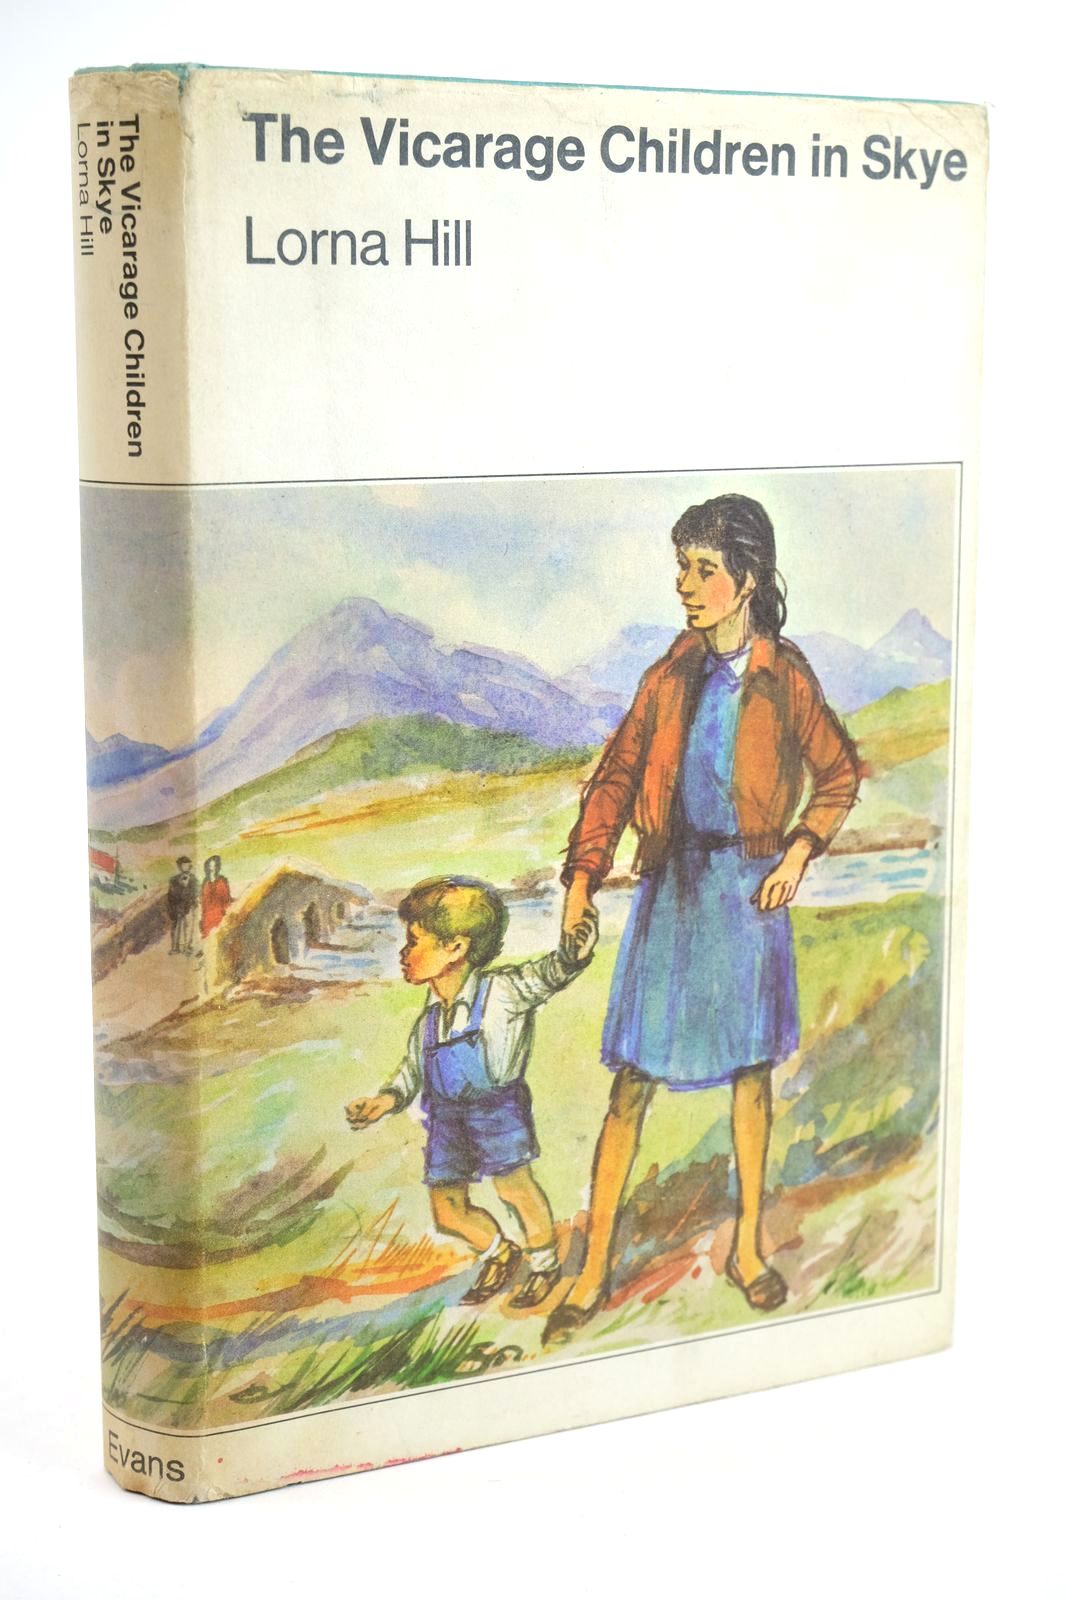 Photo of THE VICARAGE CHILDREN IN SKYE written by Hill, Lorna illustrated by Grant, Elizabeth published by Evans Brothers Limited (STOCK CODE: 1323775)  for sale by Stella & Rose's Books